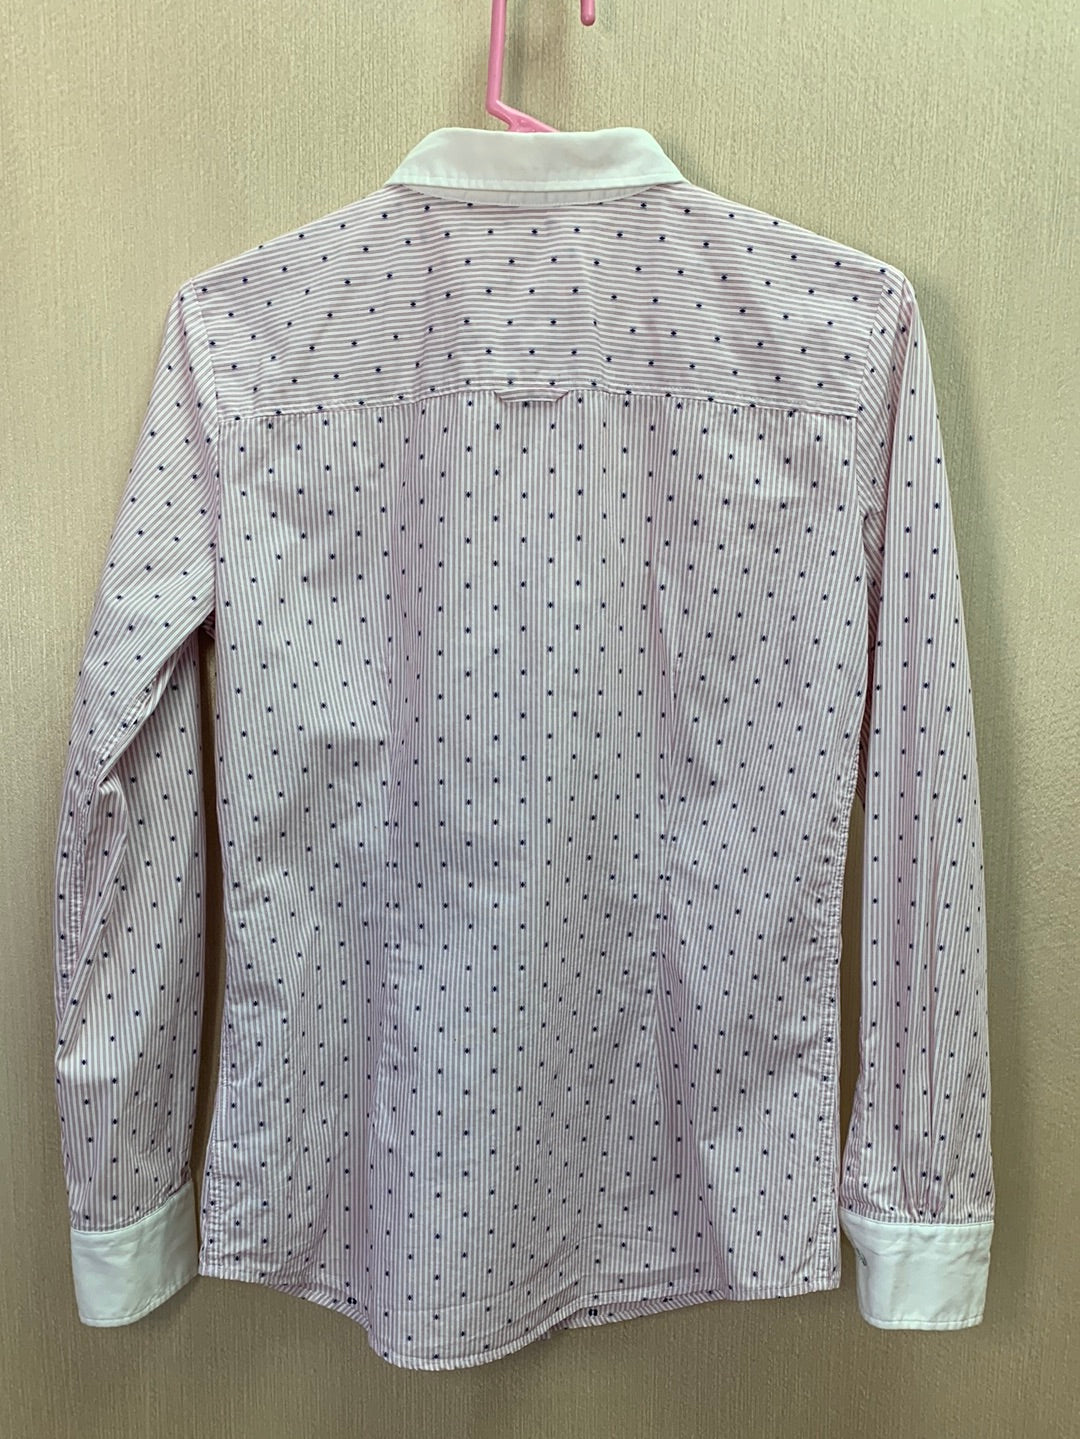 BROOKS BROTHERS RED FLEECE white pink Button Up Long Sleeve Shirt - 2